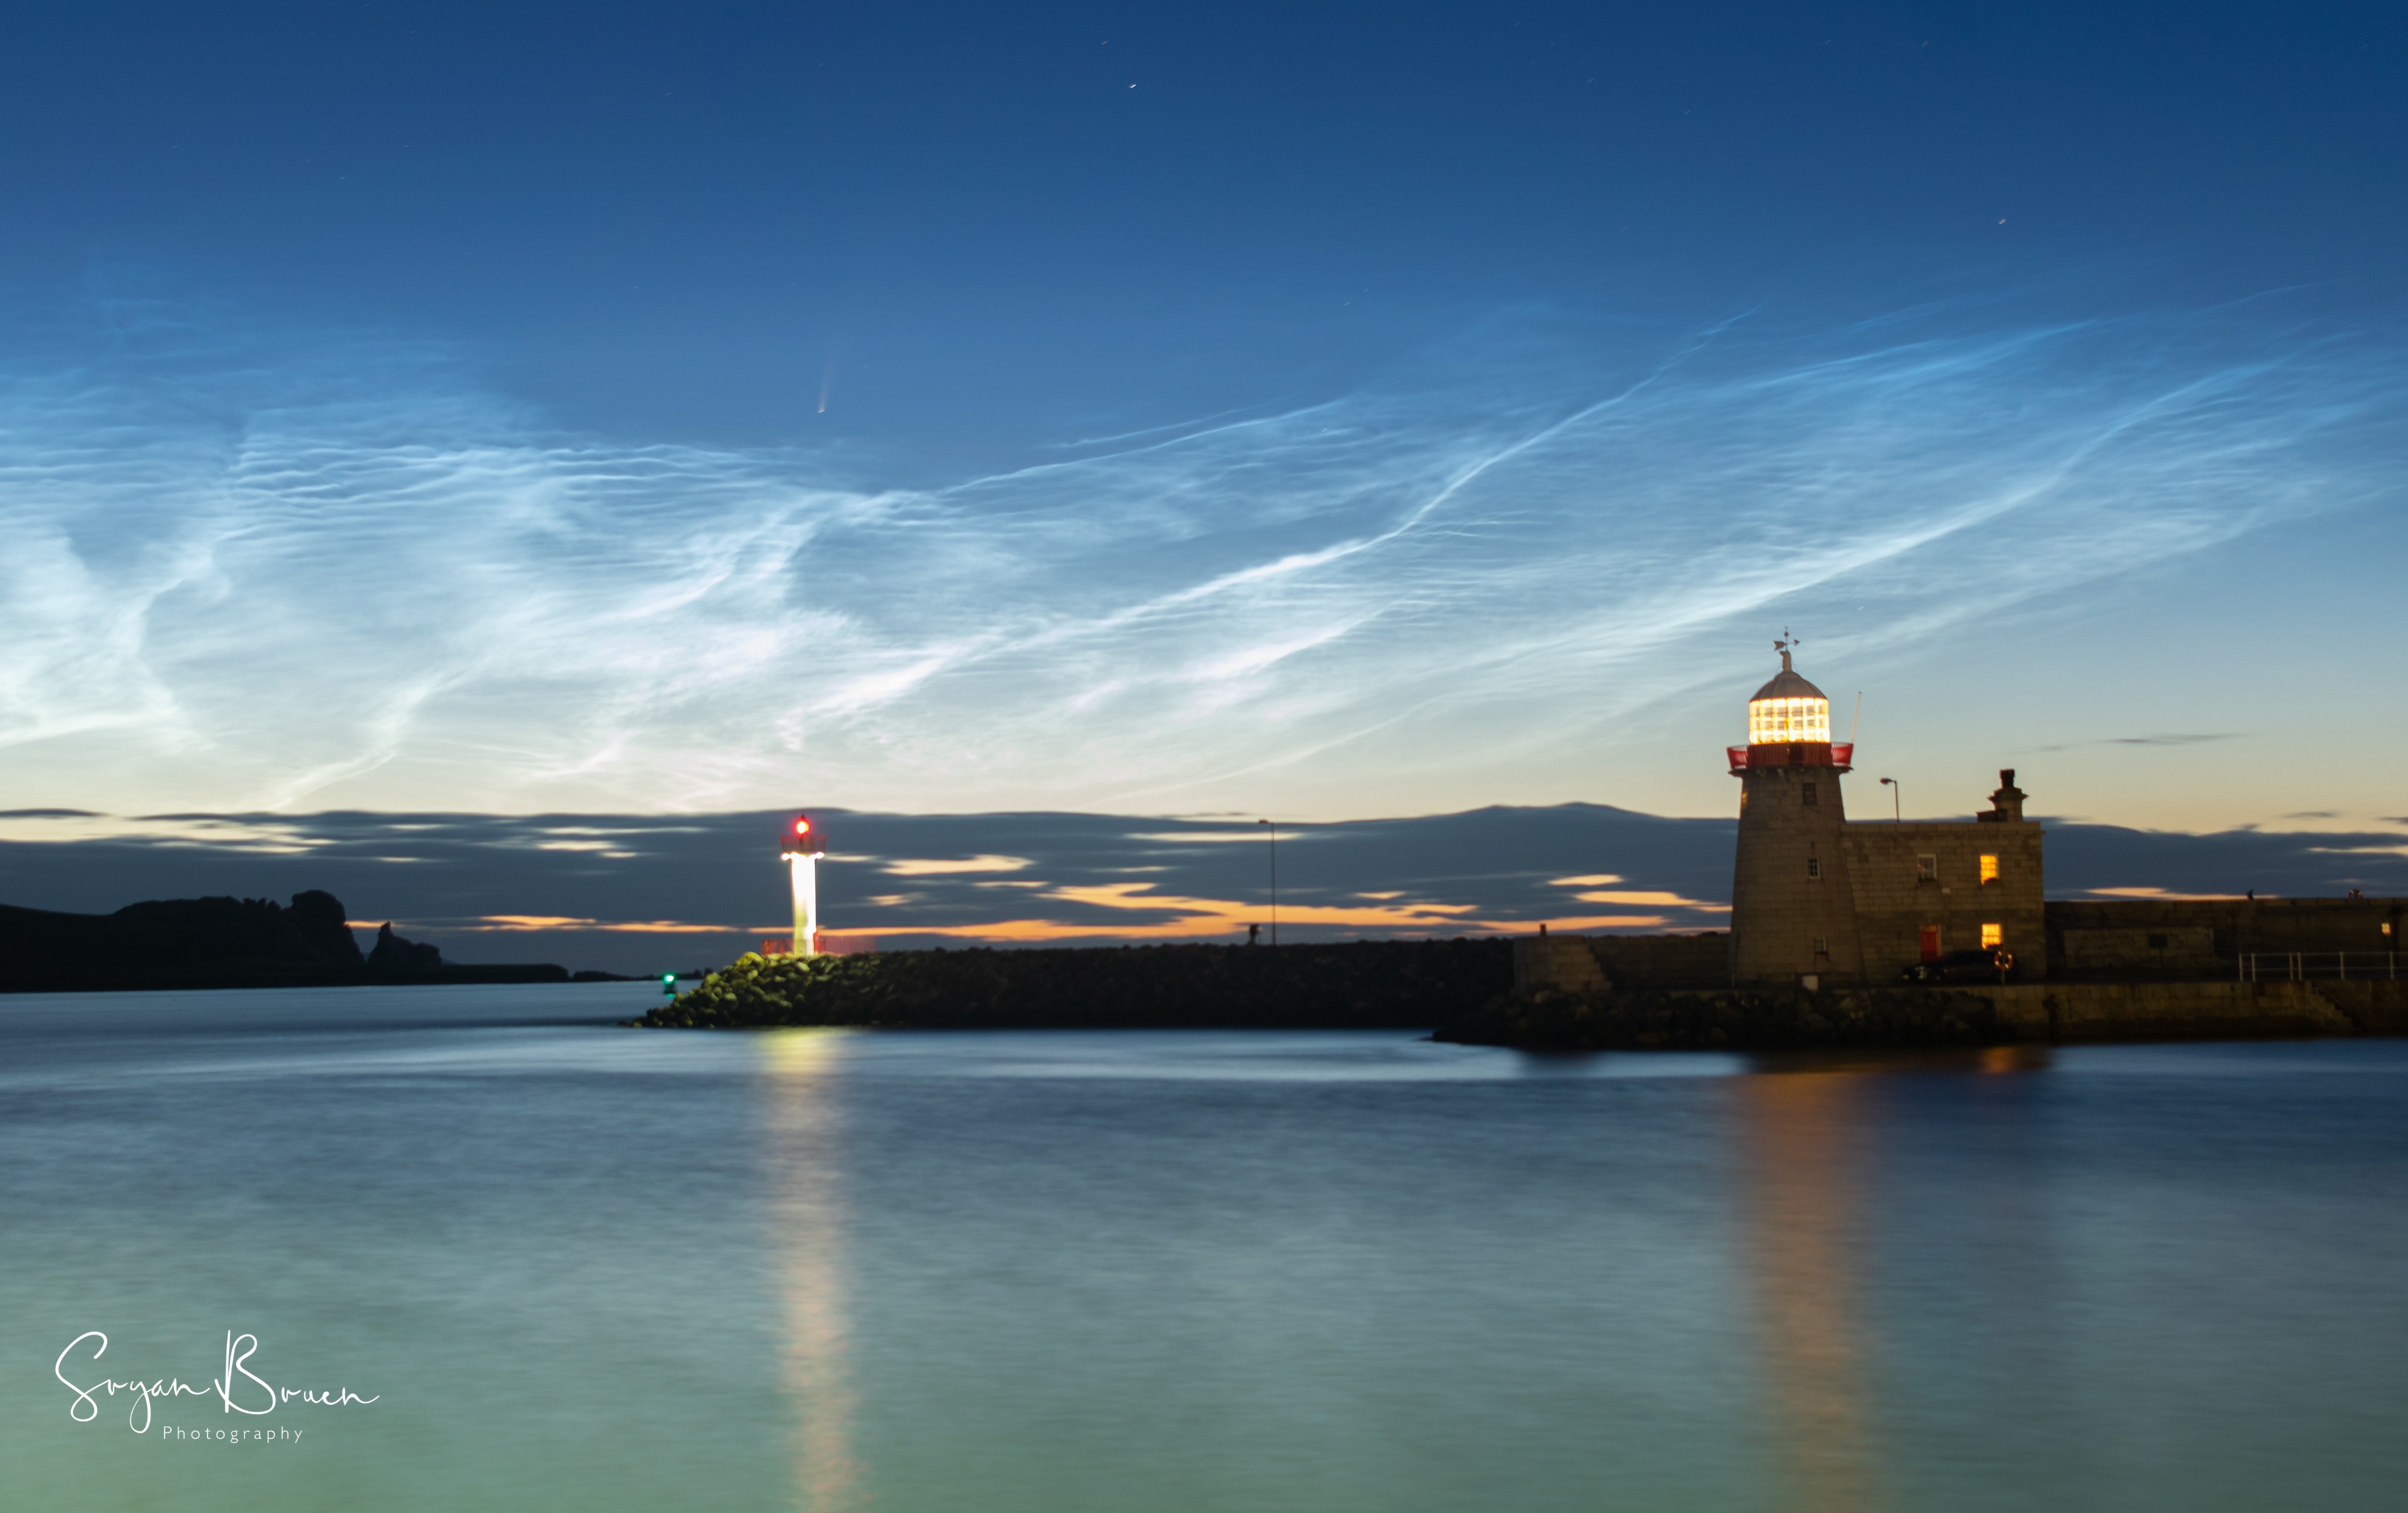 3rd Place Noctilucent clouds and Neowise comet visible at Howth Harbour, Dublin, Ireland by Sryan Bruen @sryanbruenphoto